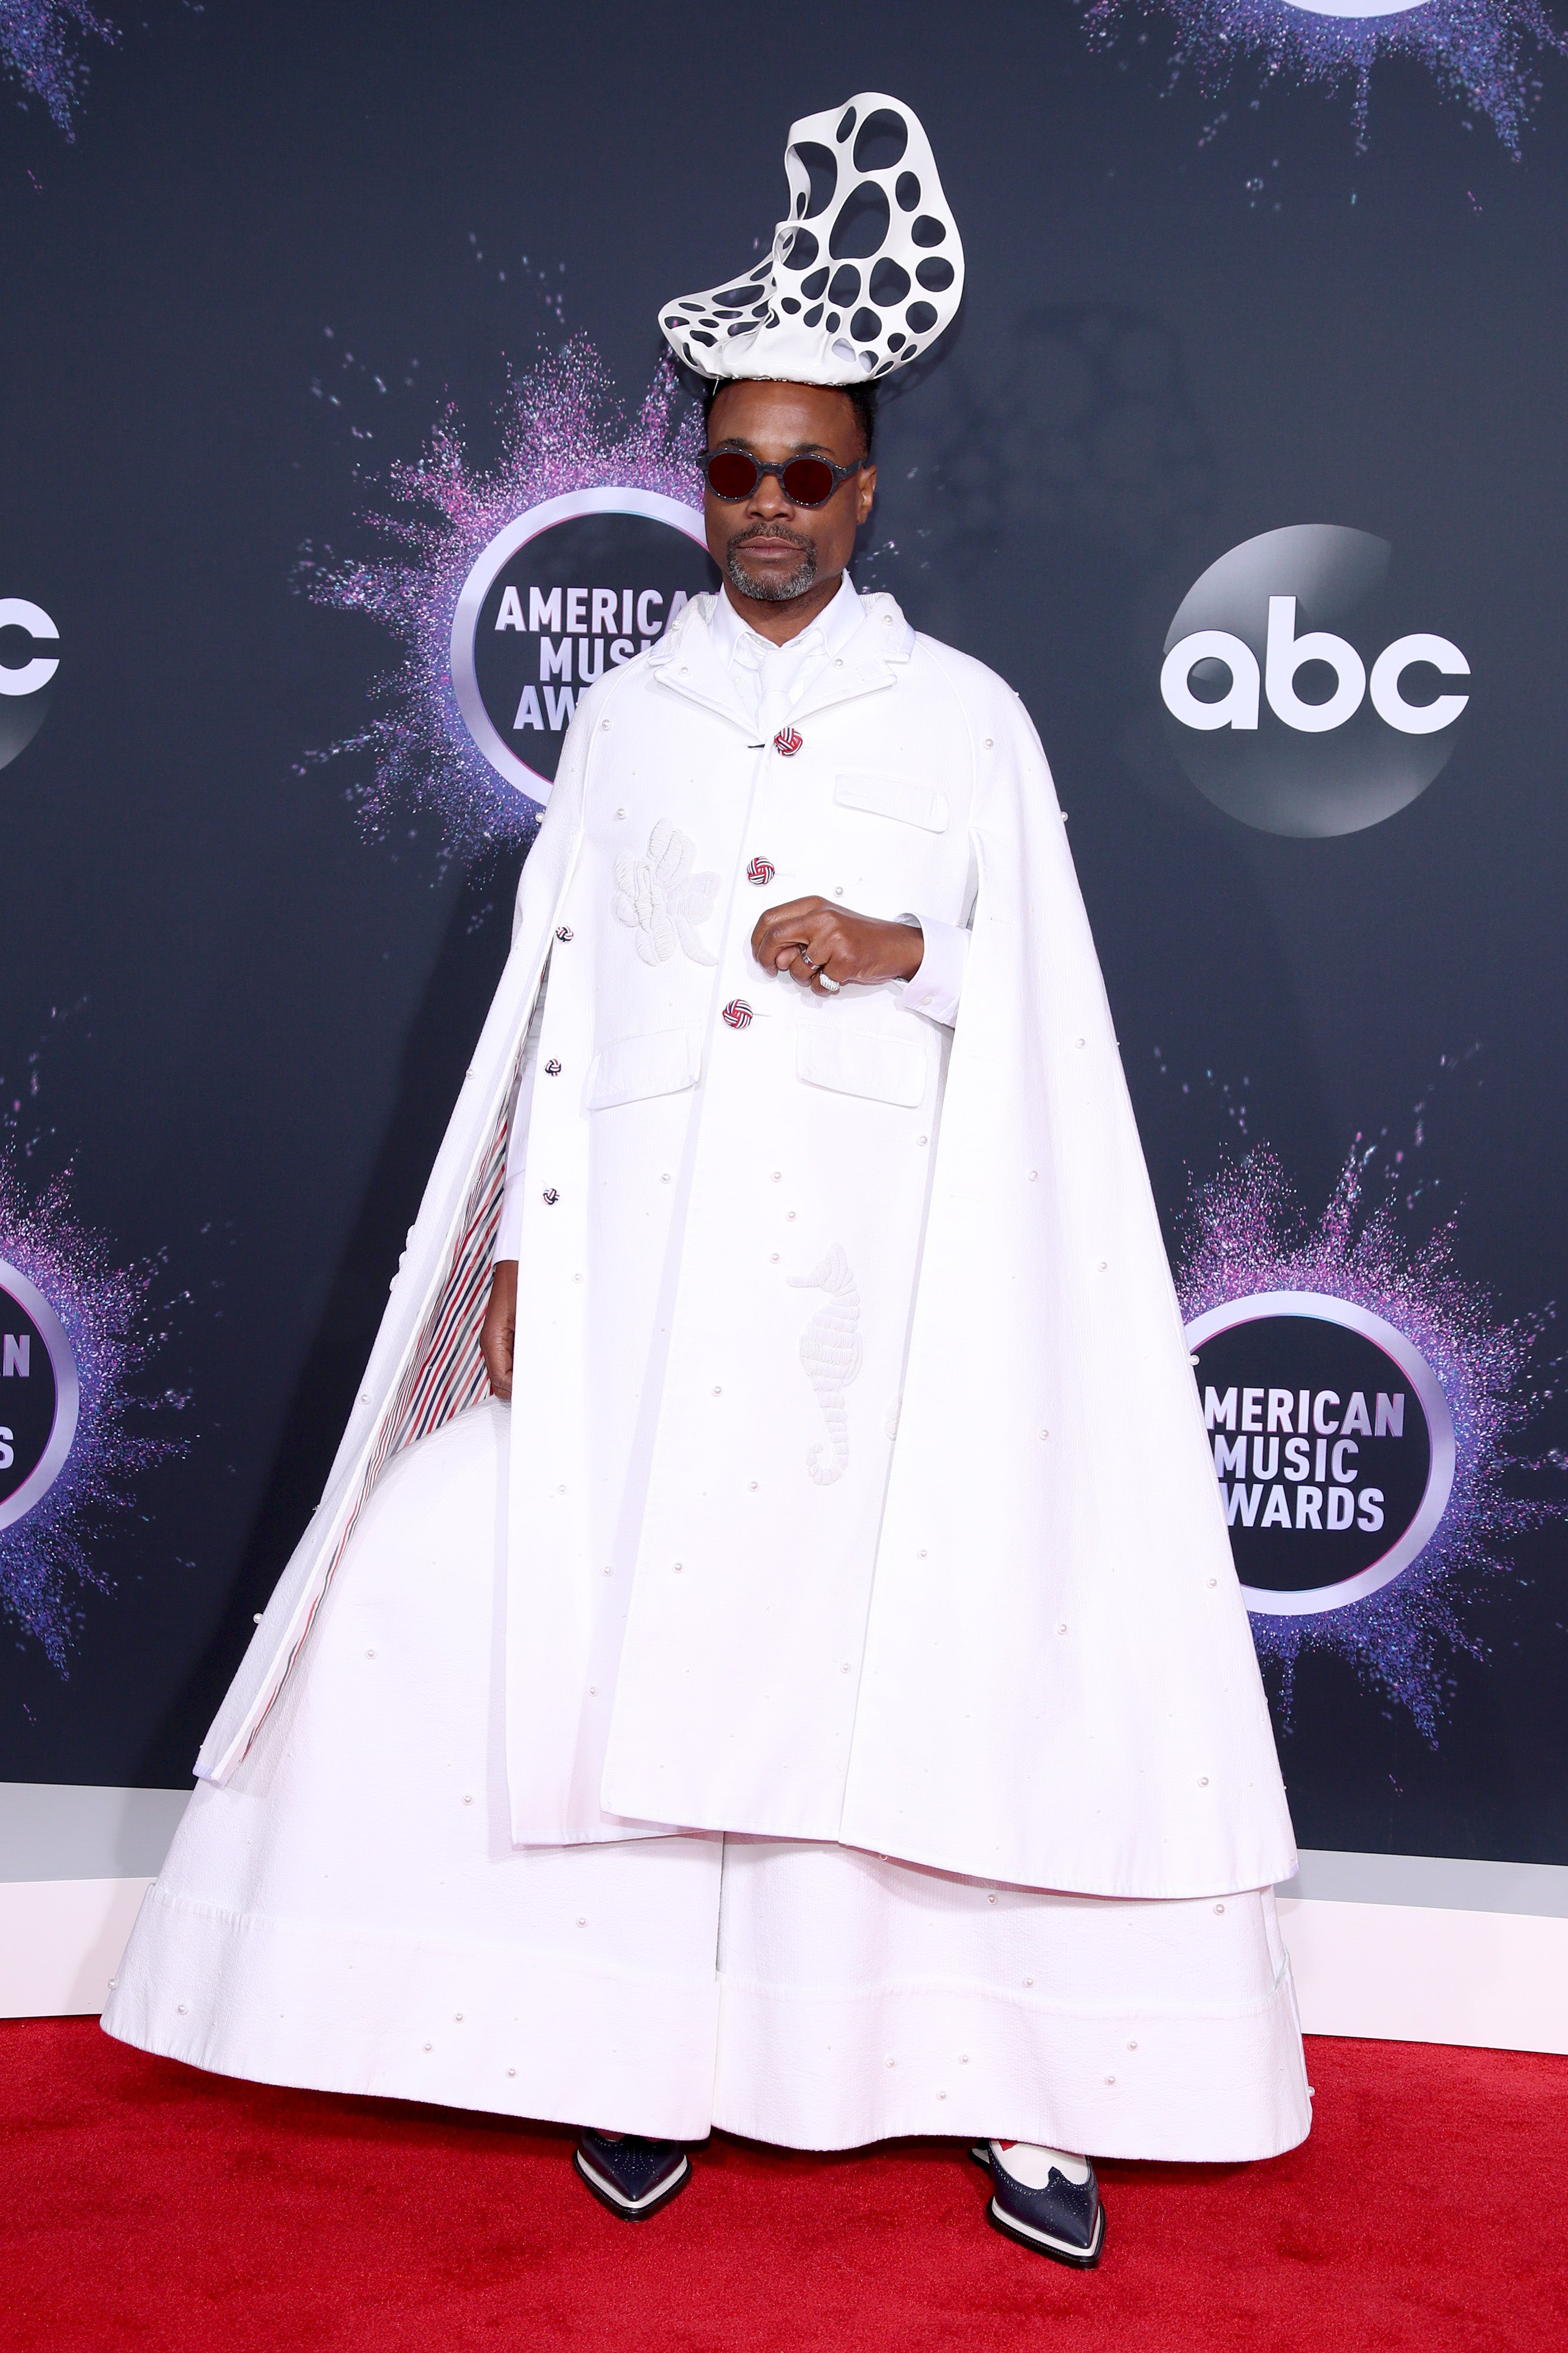 The Best Fashion Moments At The 2019 American Music Awards